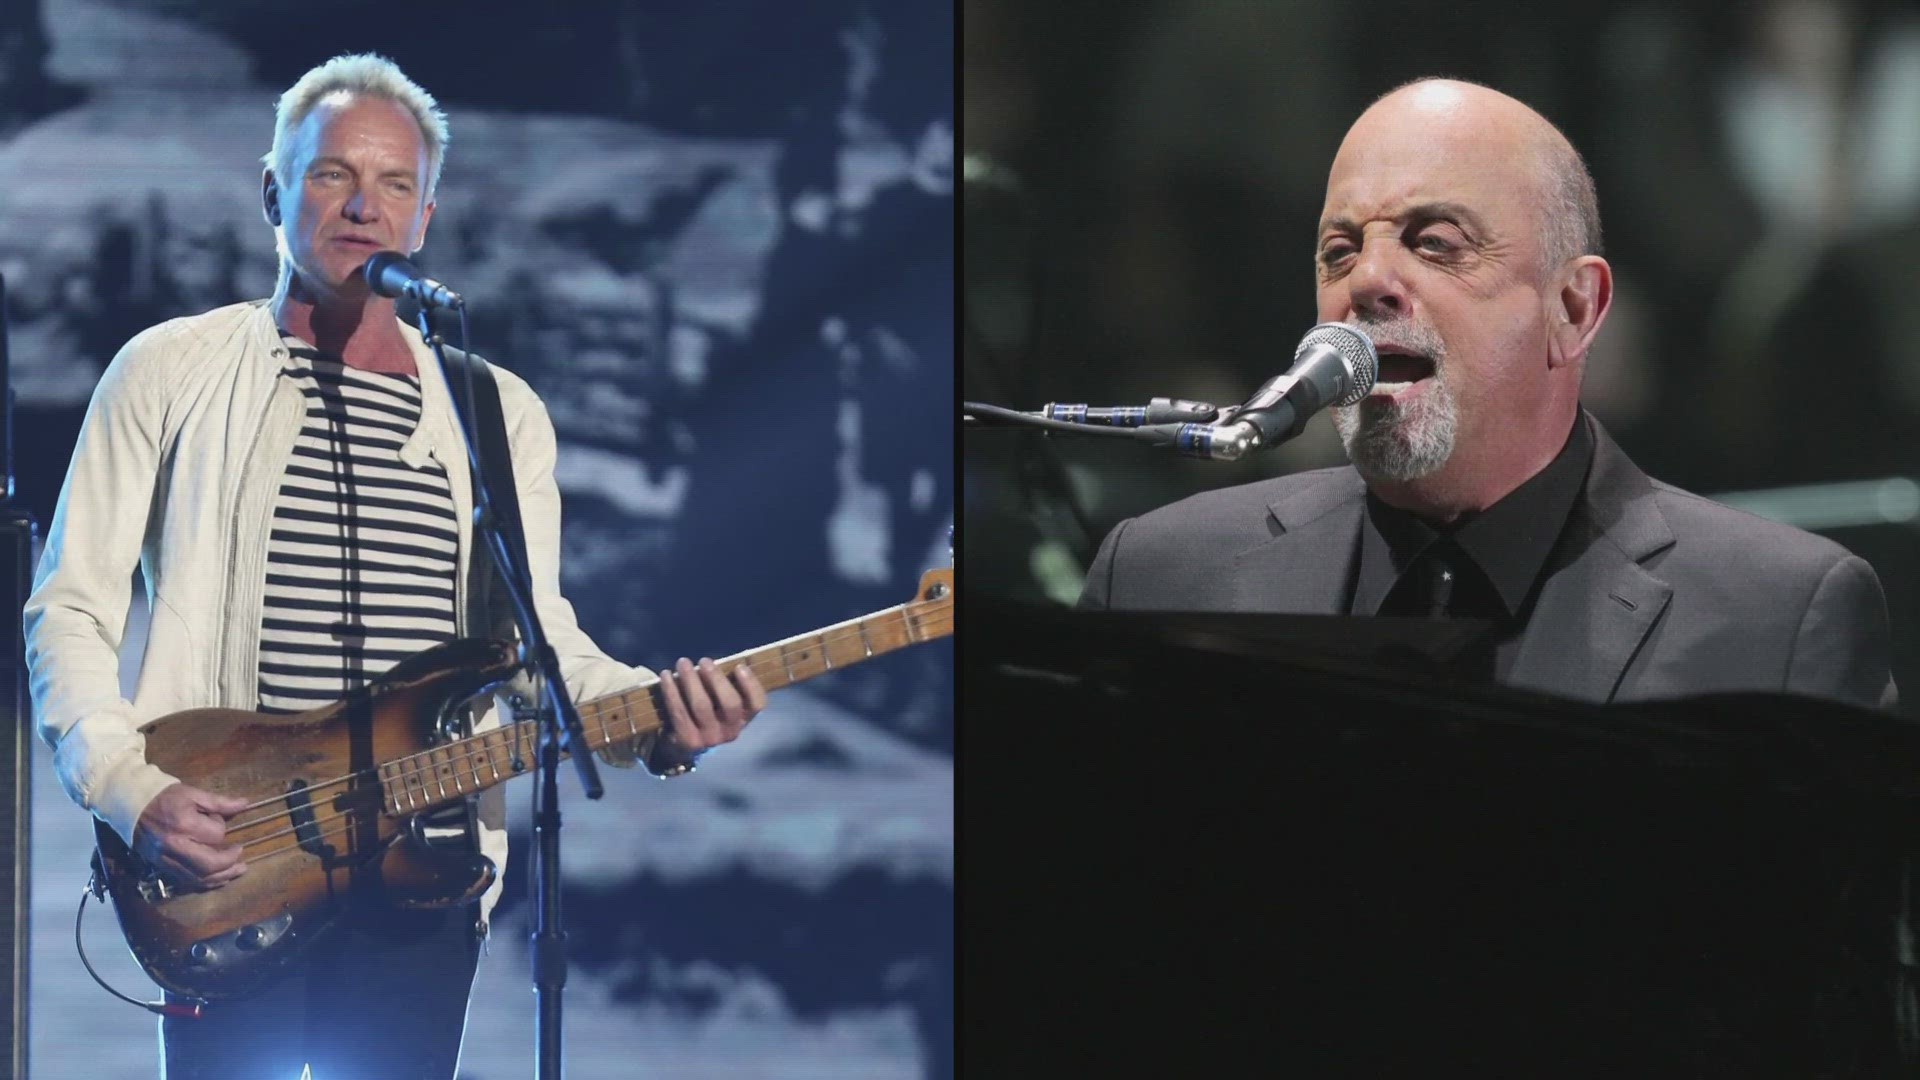 Busch Stadium is hosting another massive concert this summer. 

Billy Joel and Sting will bring their stadium tour to Bush Stadium on Friday, Sept. 27.